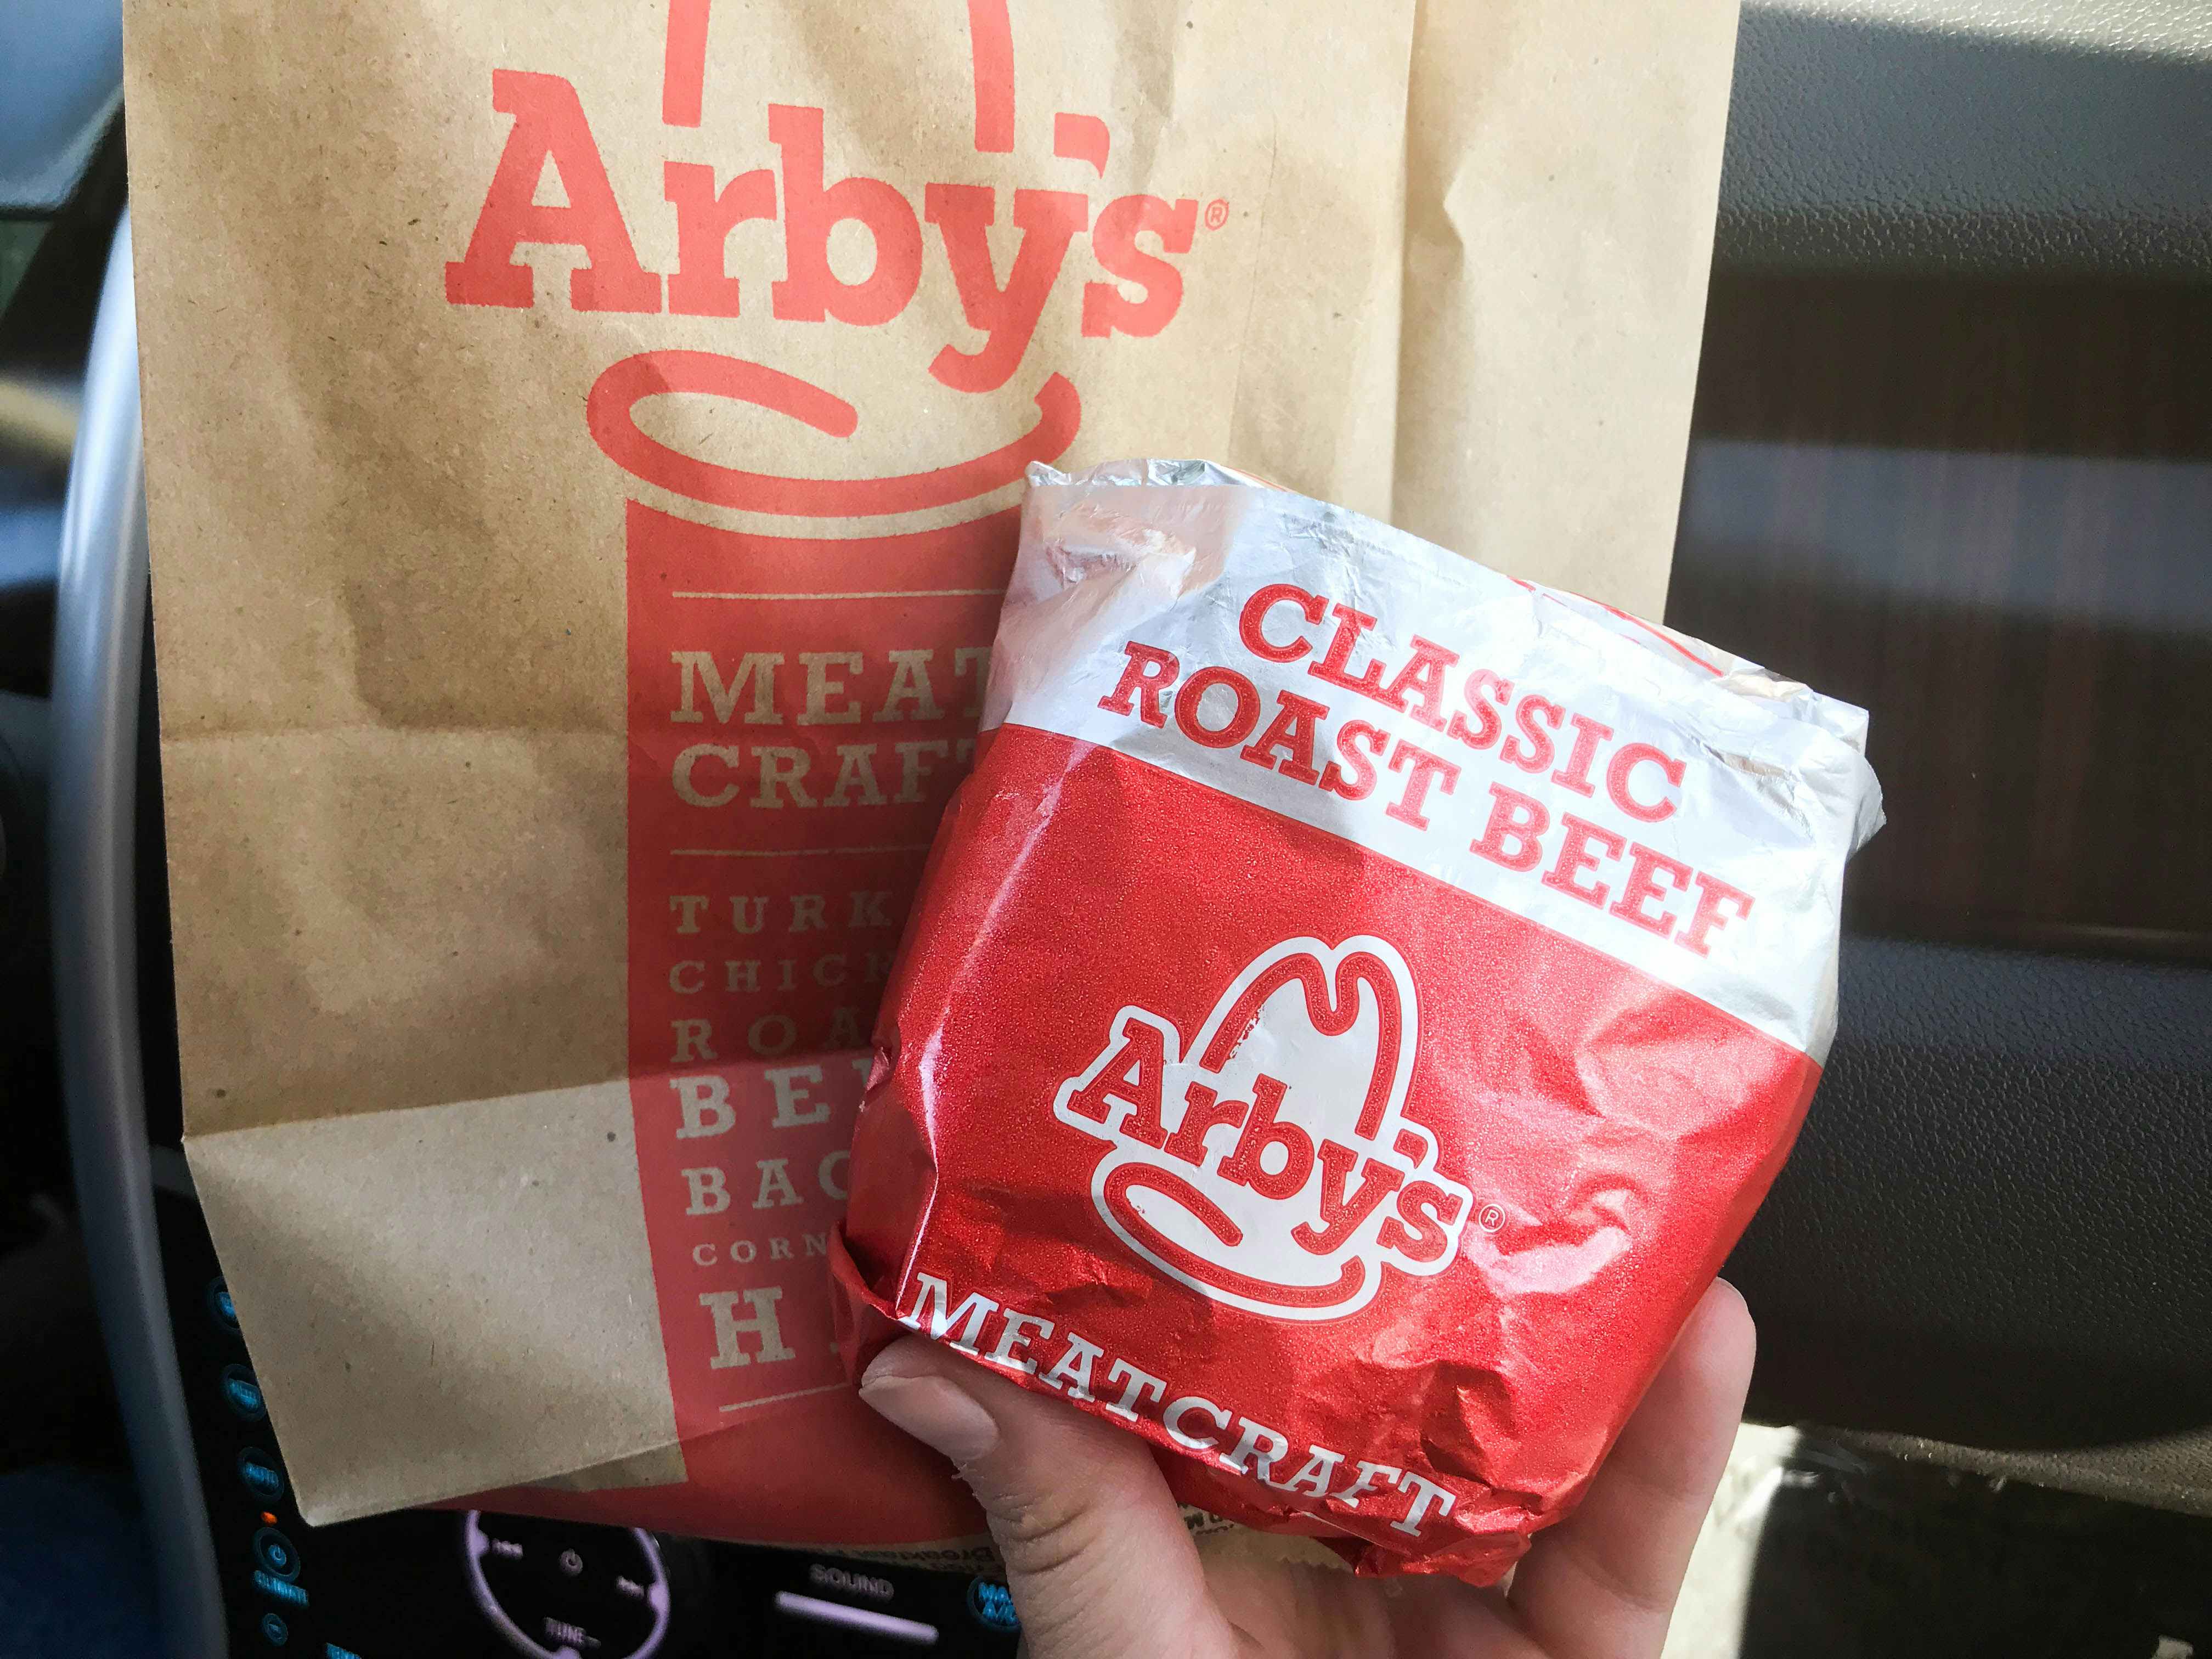 A person's hand holding an Arby's classic roast beef sandwich in its wrapper and an Arby's takeout bag in a car.